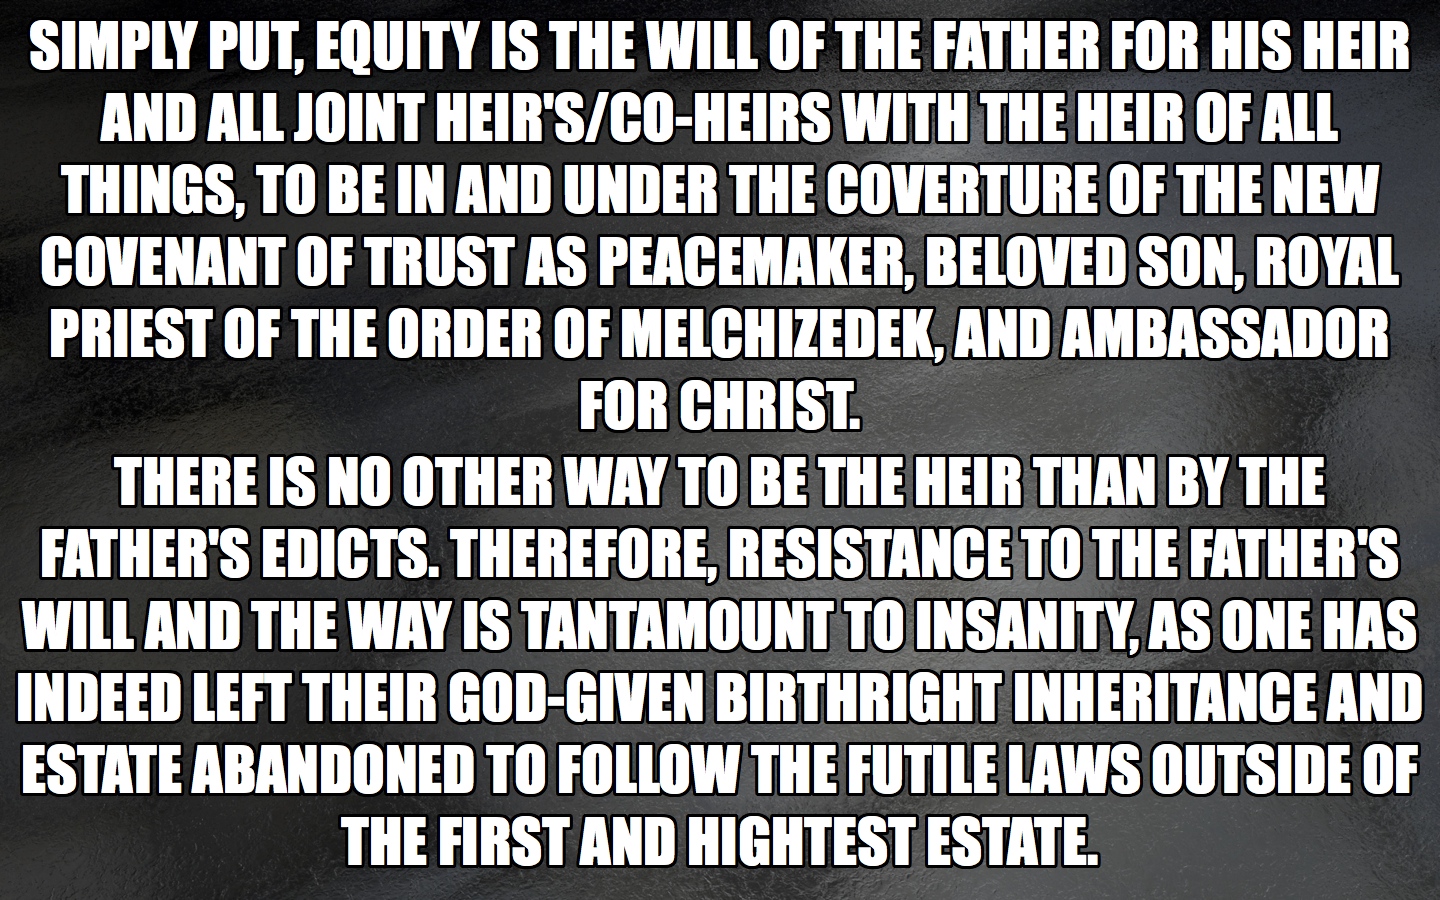 074 | Equity IS the Will of the Father